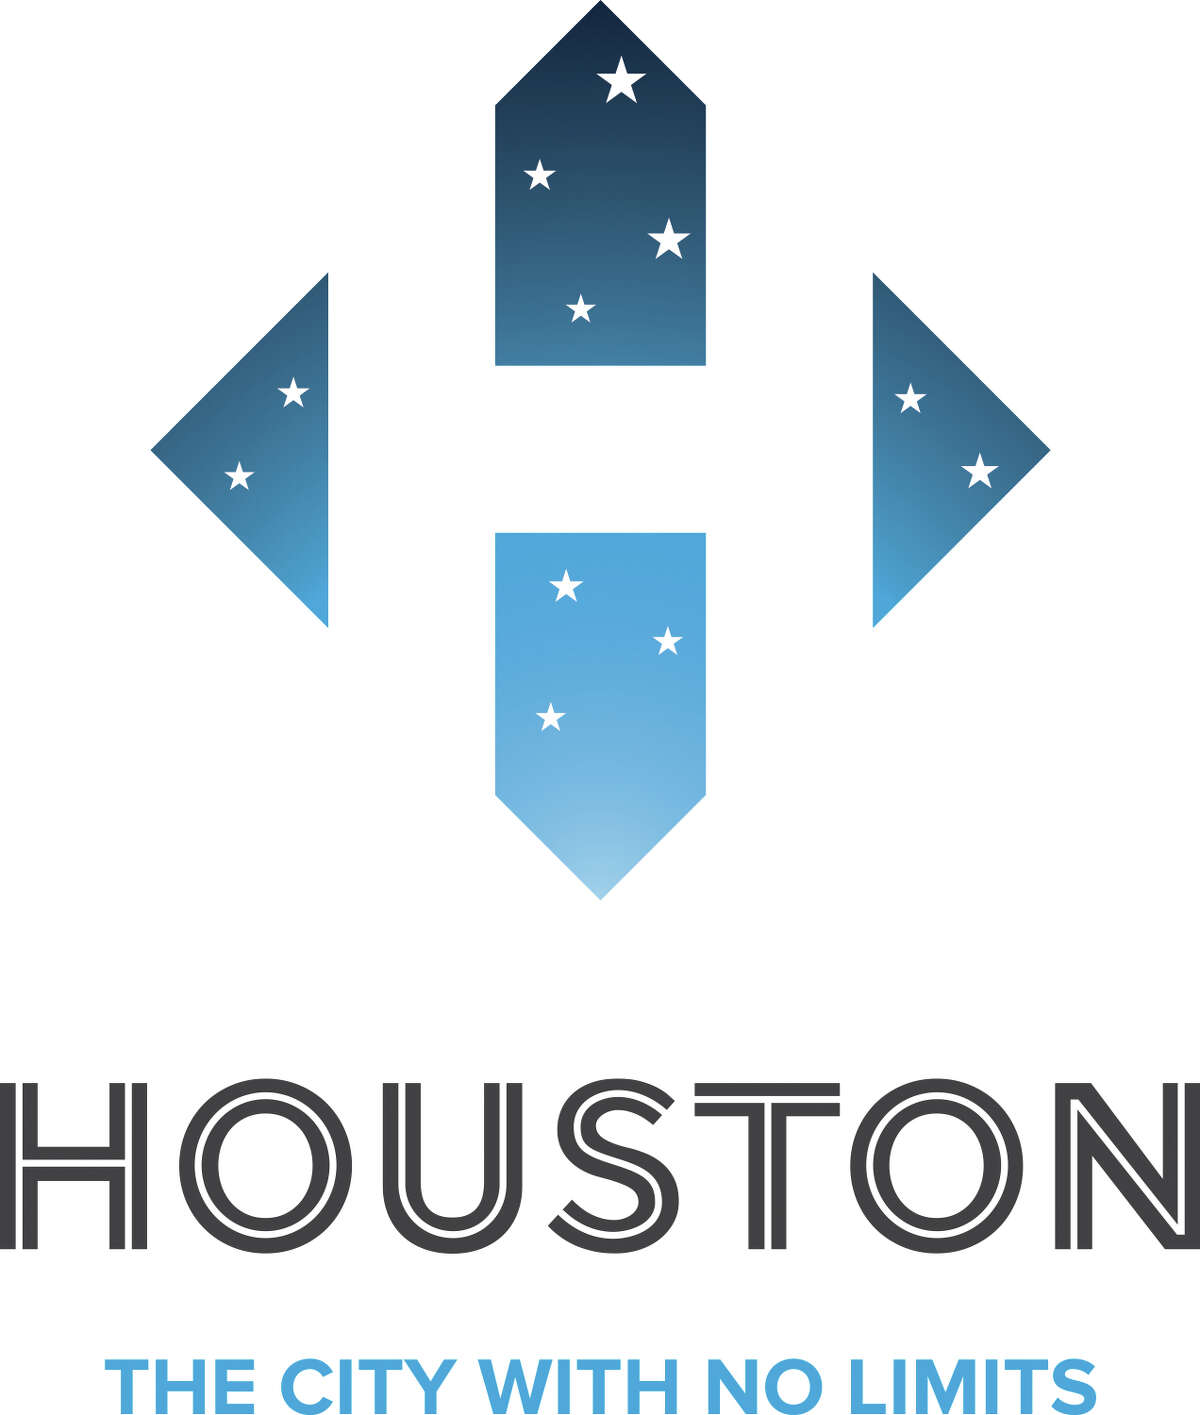 Logo for new city image campaign sponsored by the Greater Houston Partnership. The slogan is "Houston: The City With No Limits."